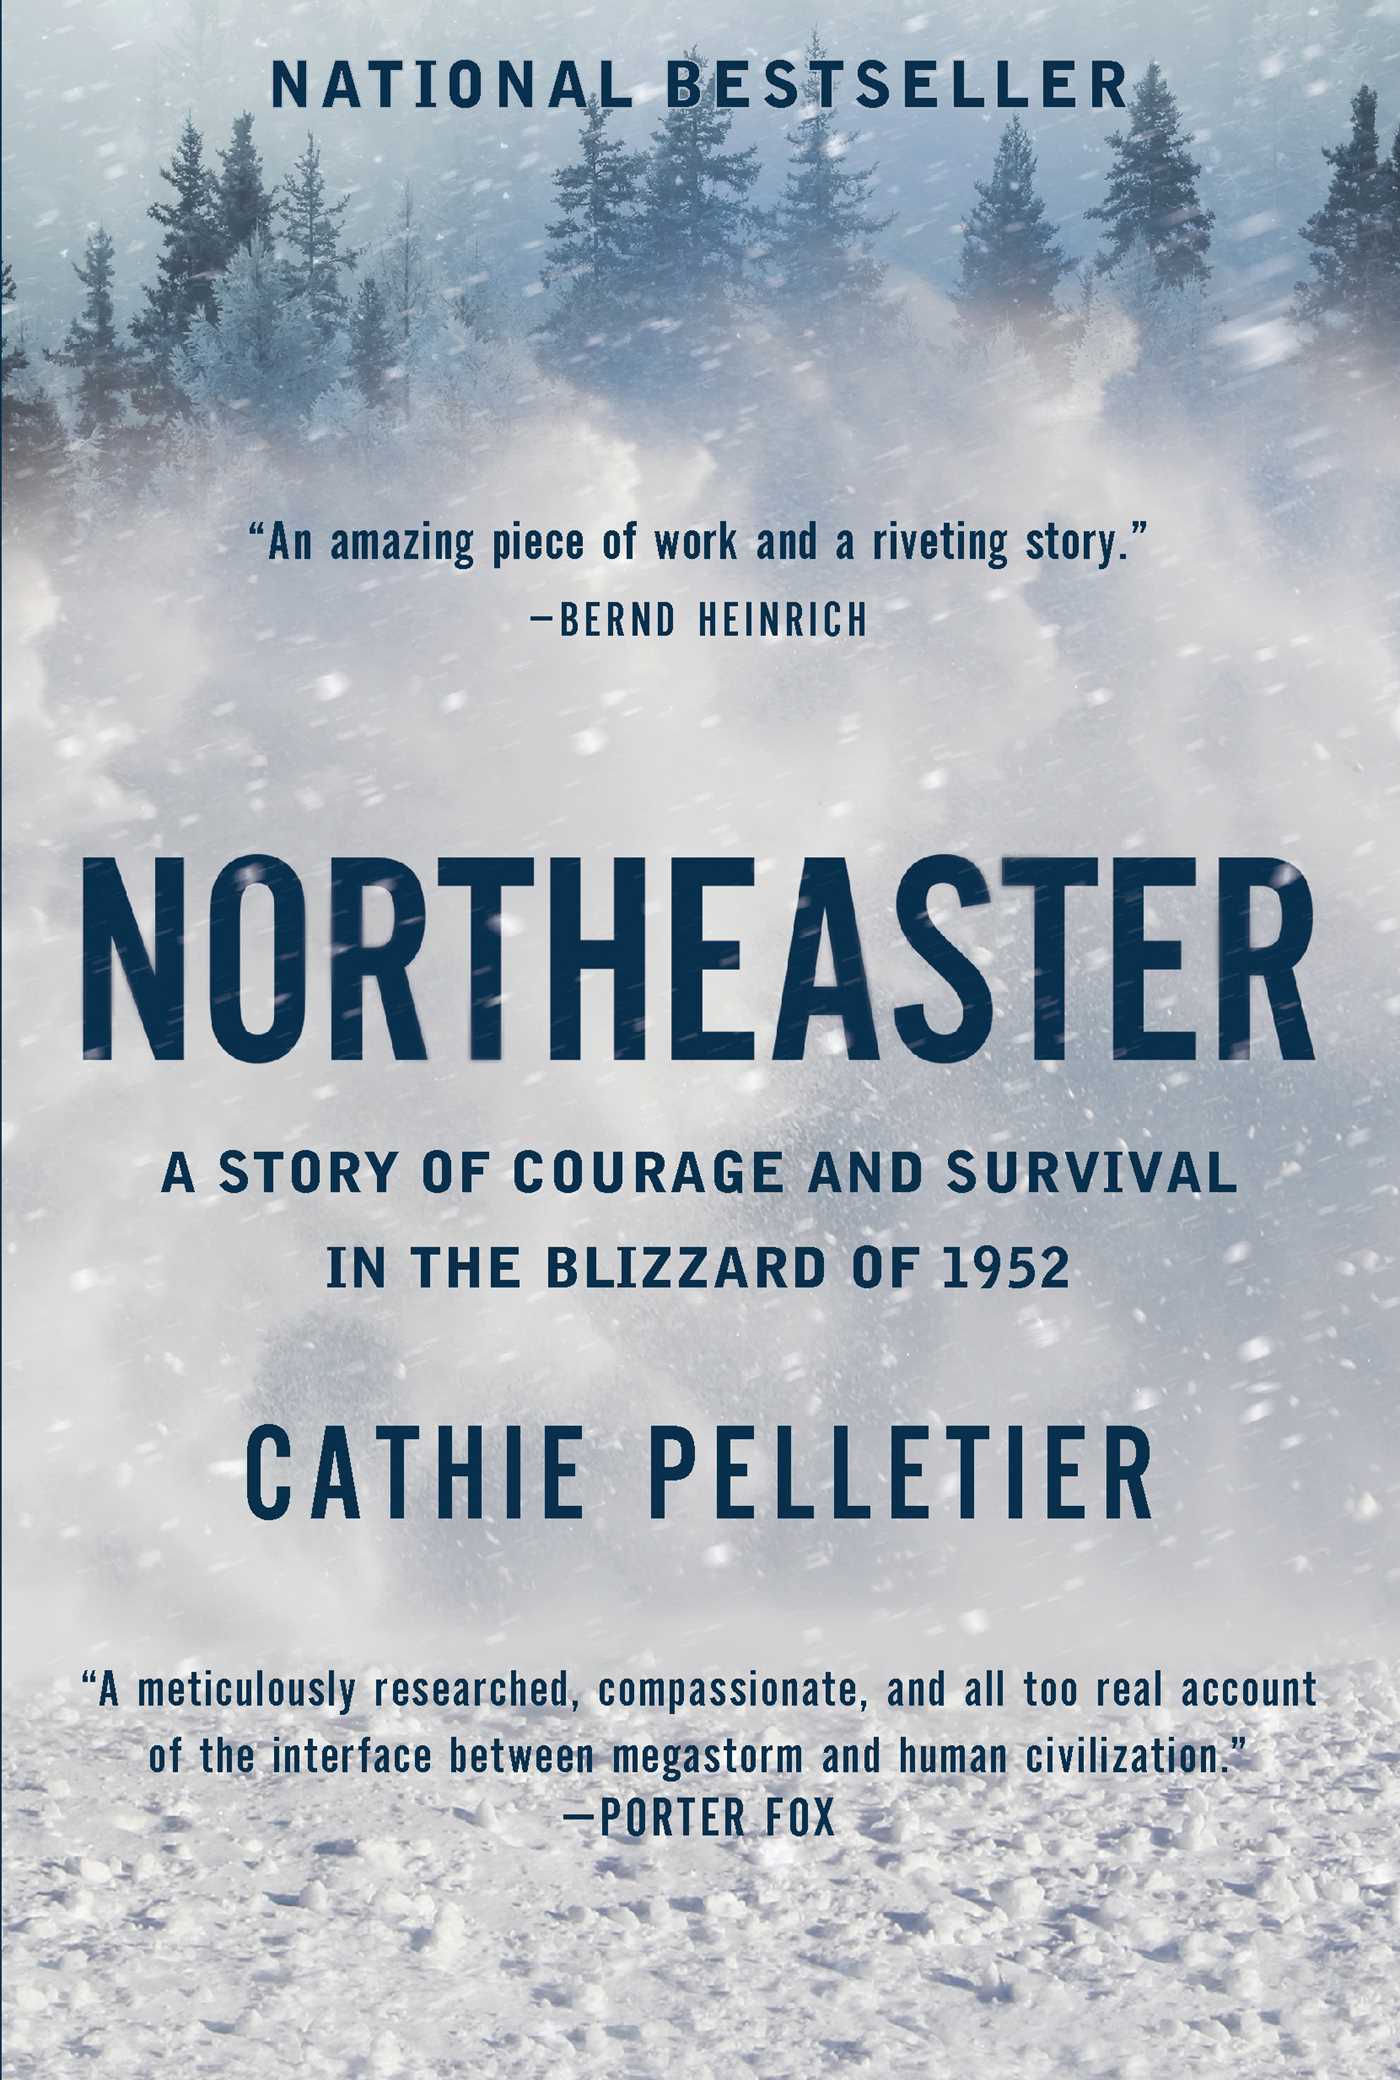 Northeaster : A Story of Courage and Survival in the Blizzard of 1952 | Pelletier, Cathie